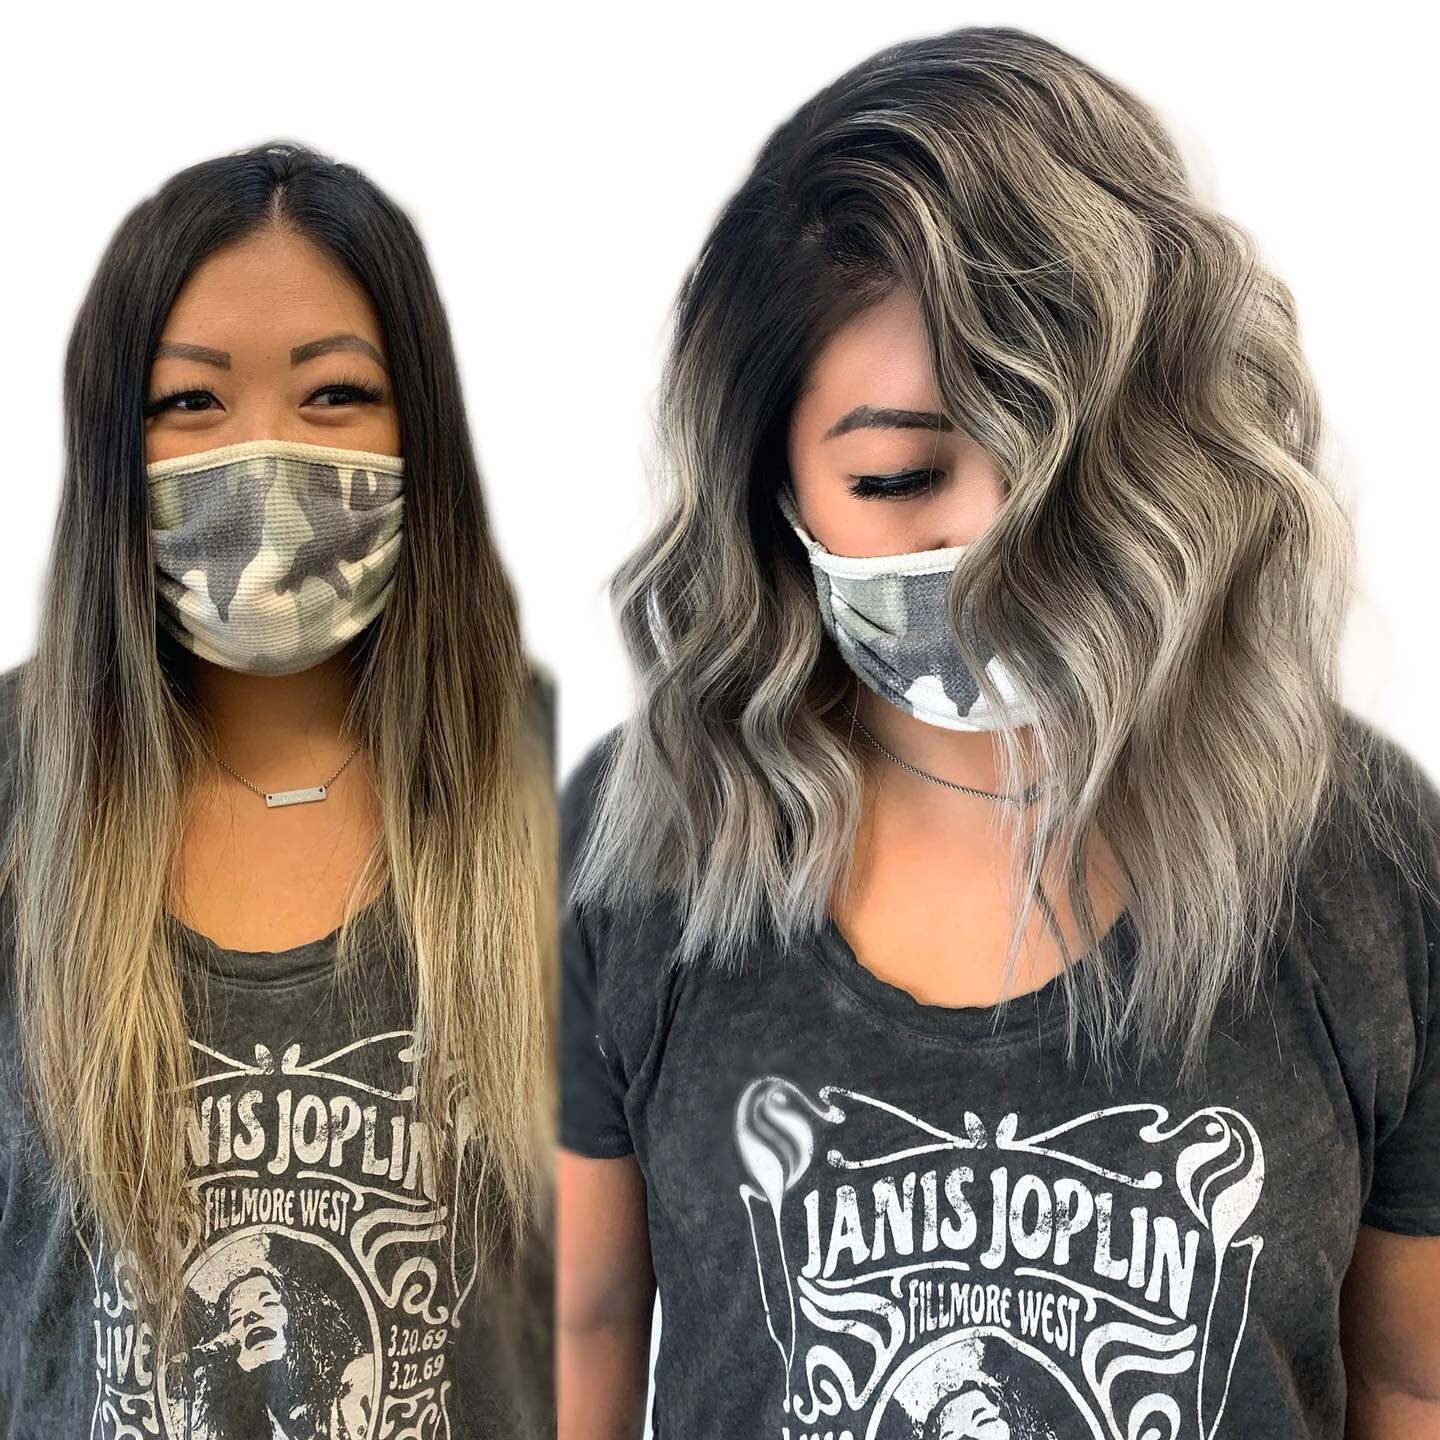 Any guesses on how long this transformation took?
.
.
.
.
.
Before and after by @stylingpretty 
.
.
.

#behindthechair #modersalon #americansalon #beautylaunchpad #bestofbalayage #mastersofbalayage #citiesbesthairartists #balayageartists #davines #fa